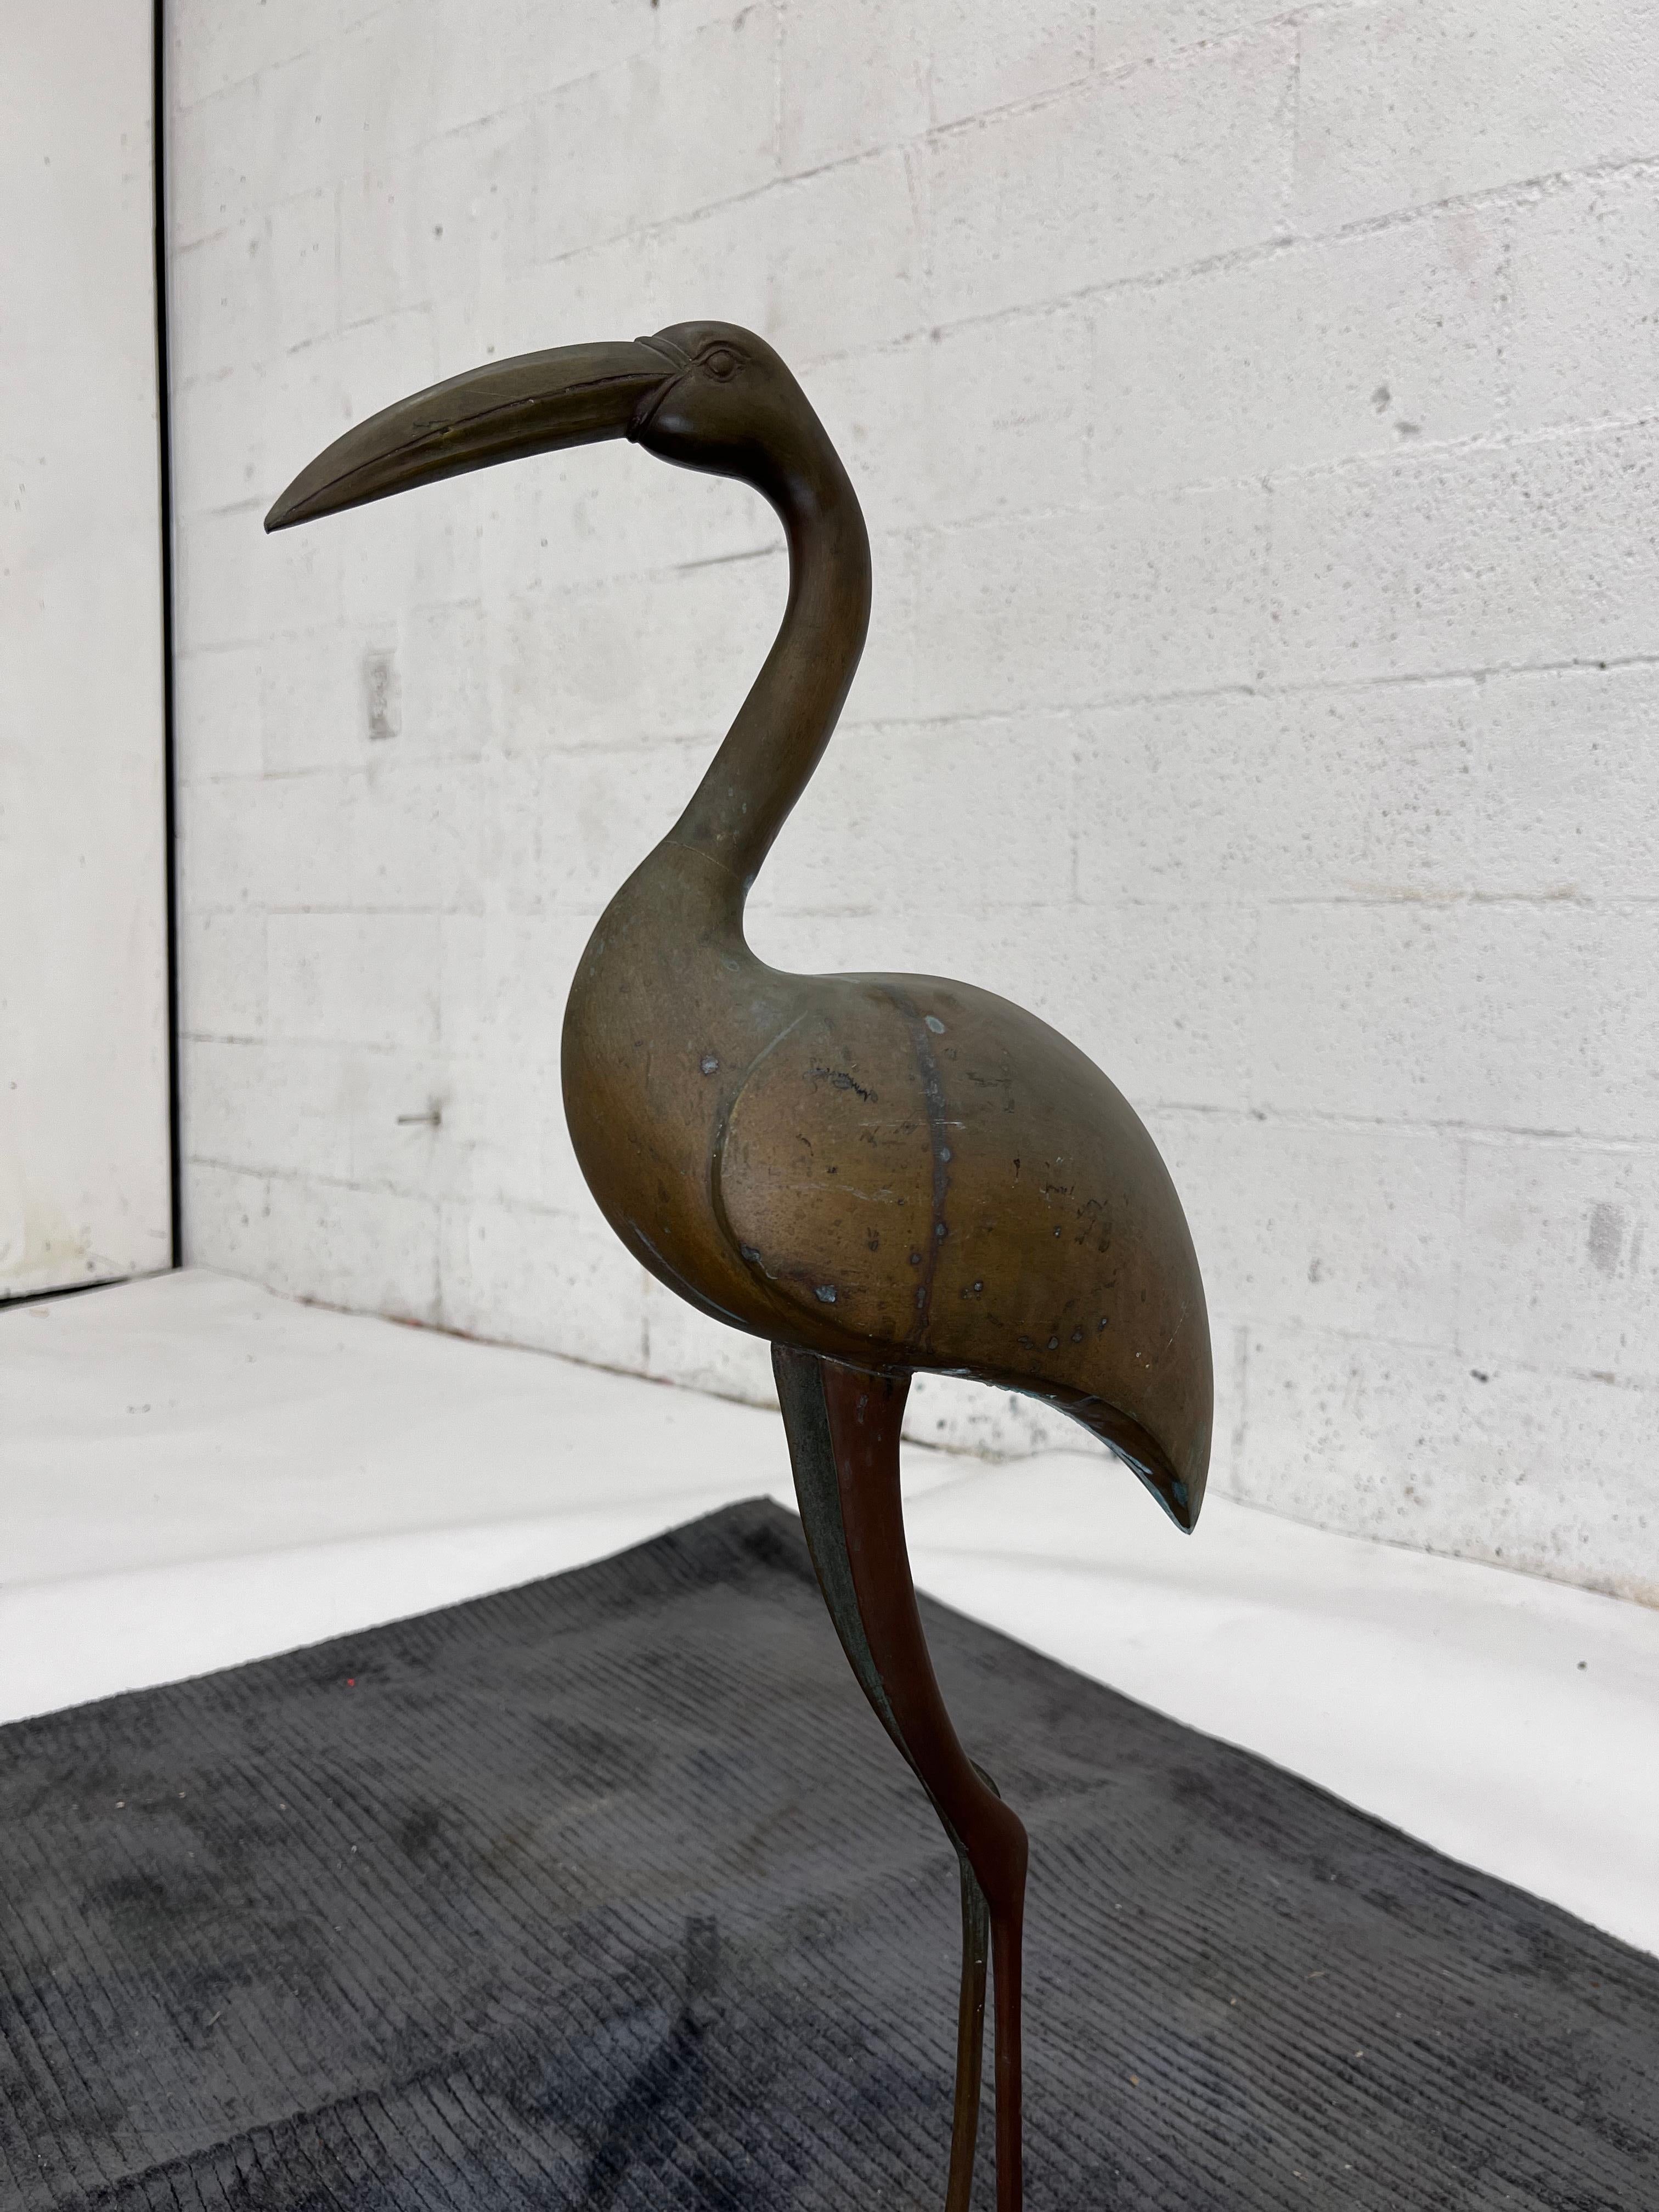 1970s Heron or Crane. Full bronze construction, heavy and sturdy. Can be polished to bright finish or left with original patina. 

Measures: 29.75”H
7.75” base.